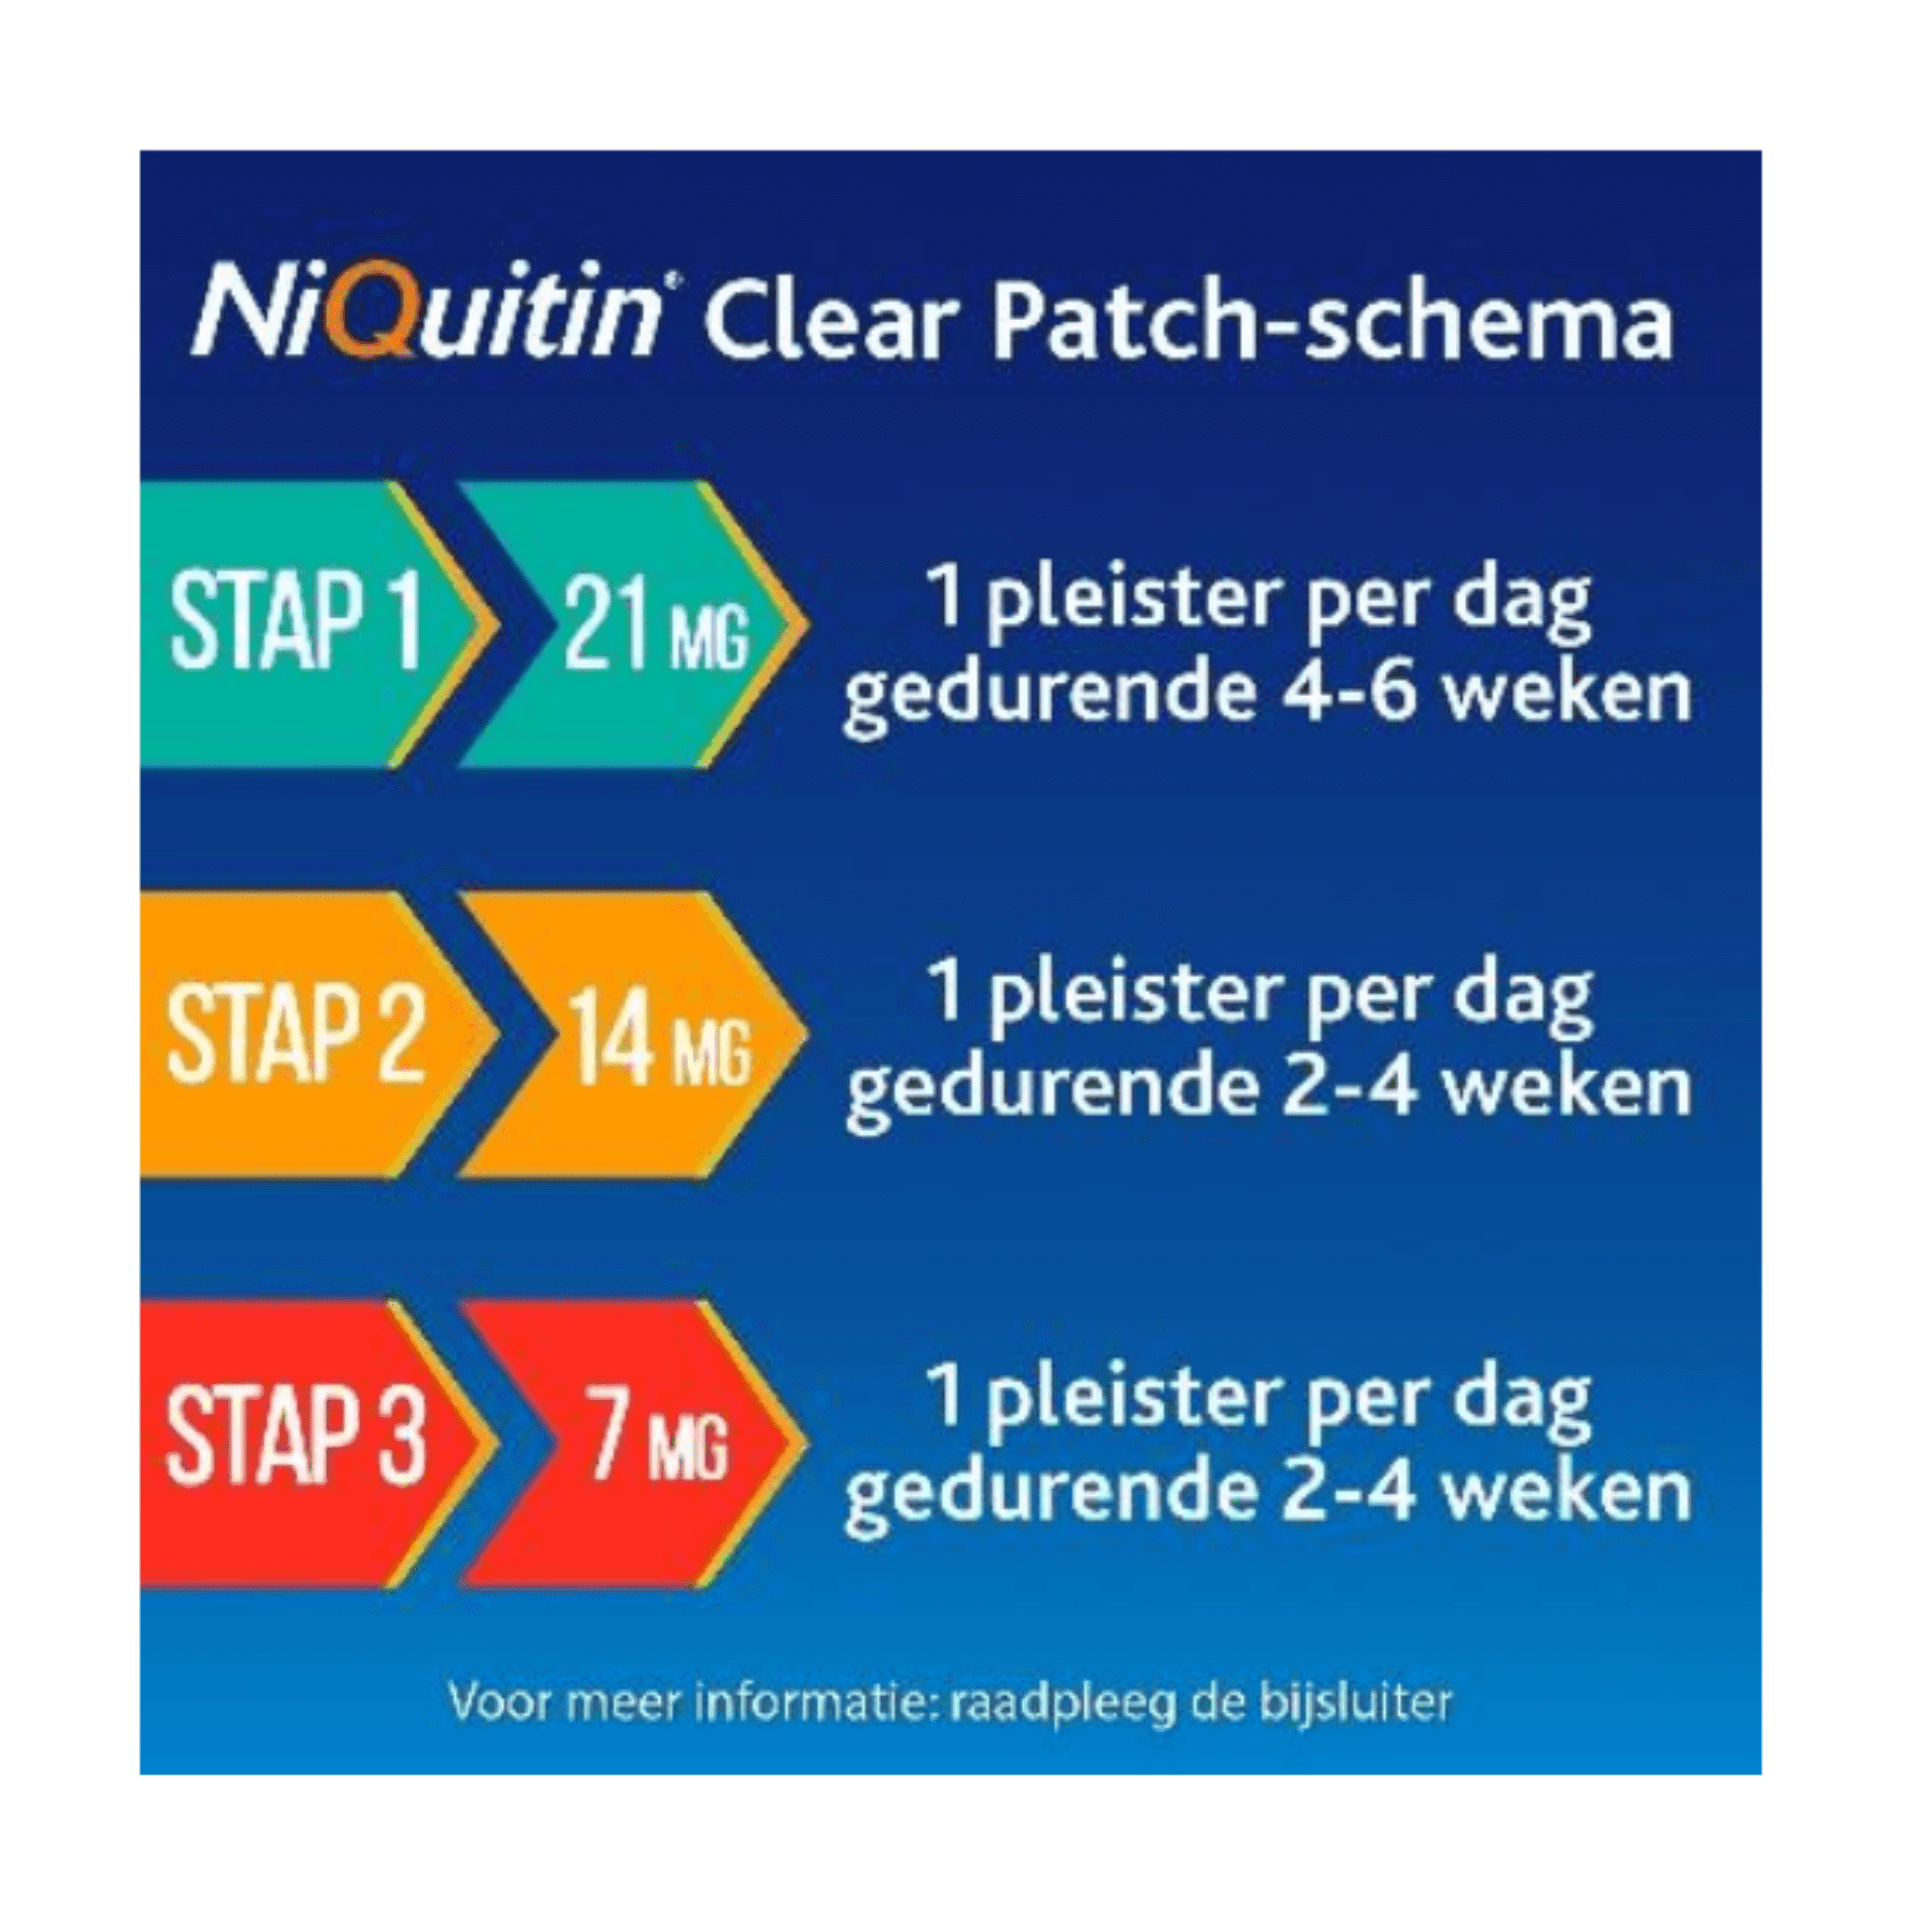 Niquitin Clear Patches 21 mg